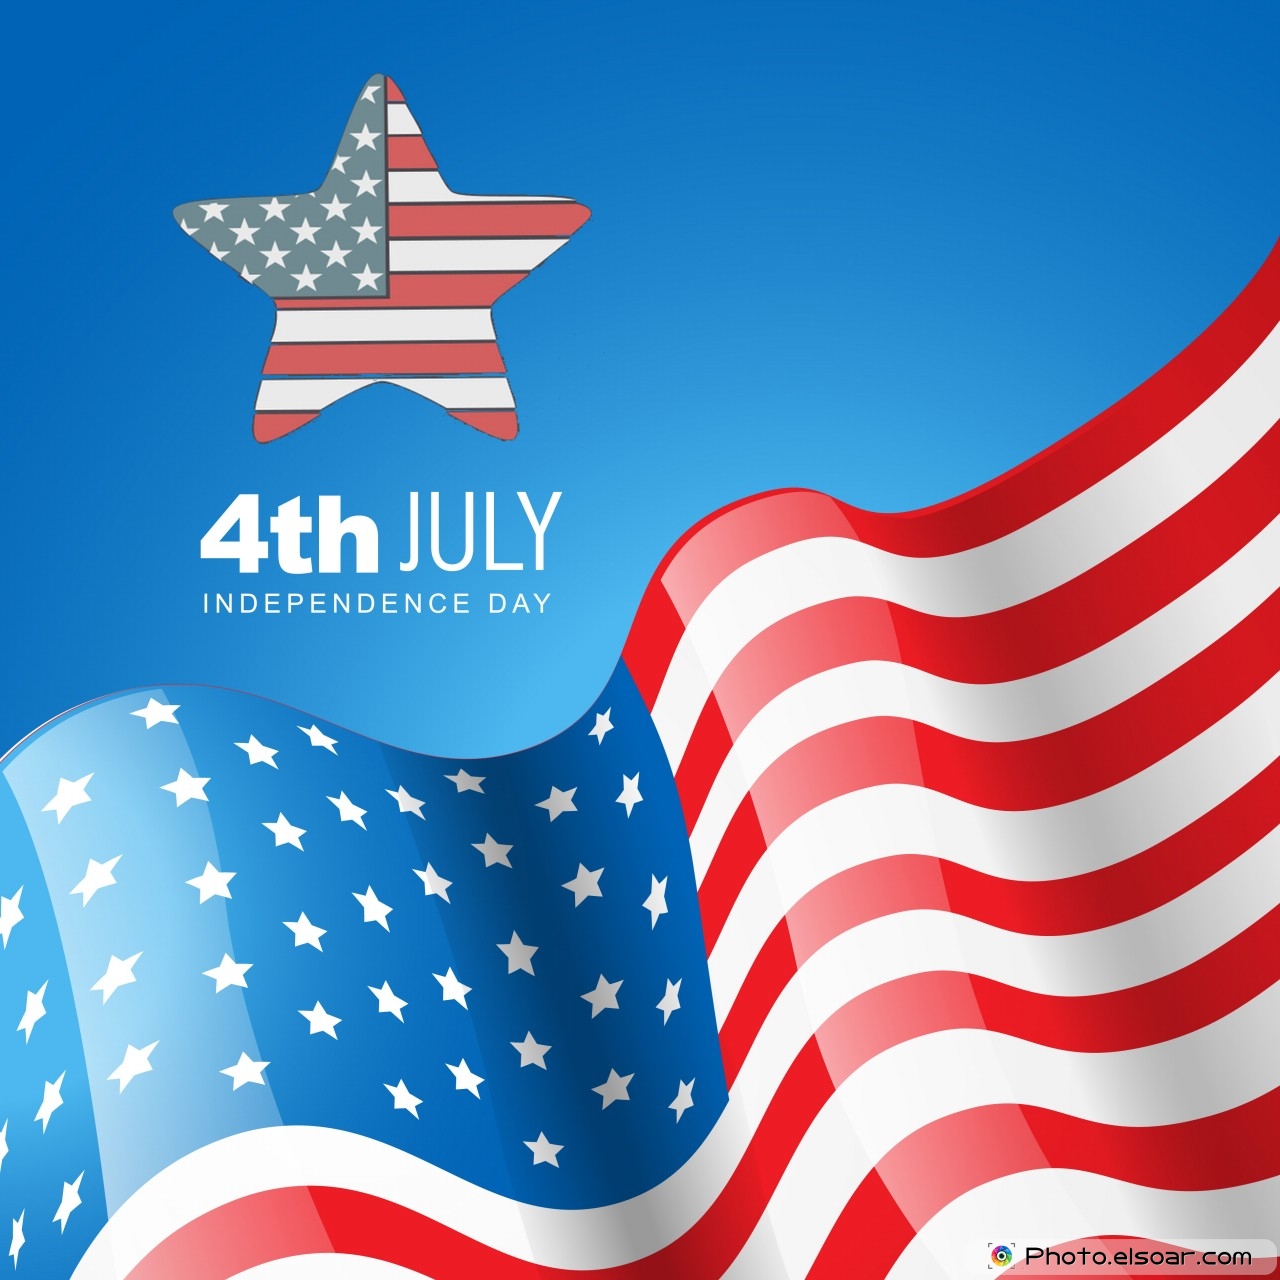 4th Of July Independence Day Wallpaper - Us Independence Day 2014 - HD Wallpaper 